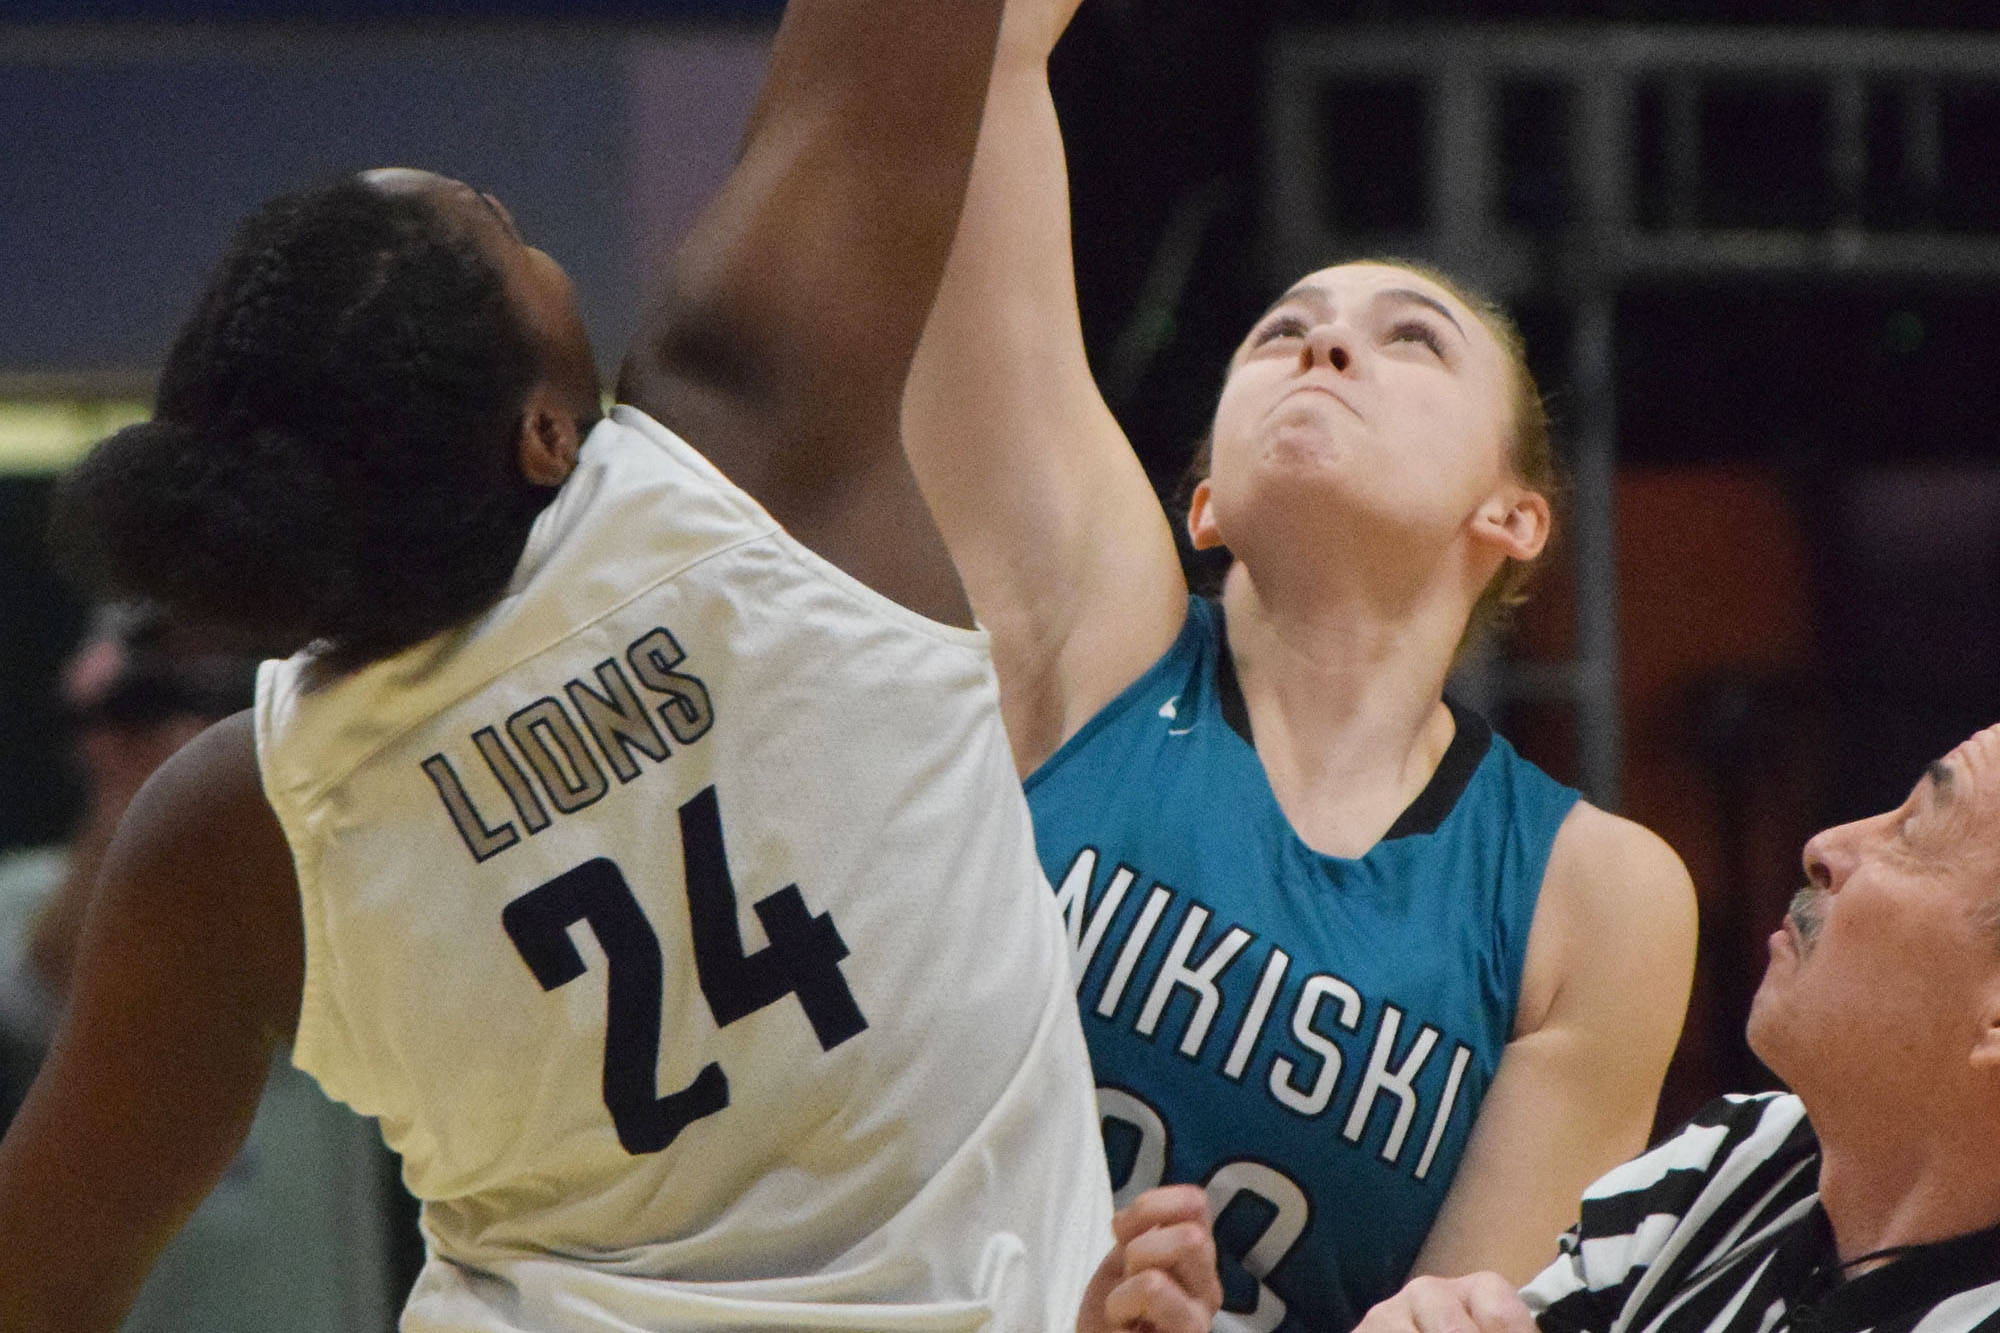 Nikiski’s Bethany Carstens (right) and ACS’s Jordan Todd tip off to begin the 2019 Class 3A girls state basketball championship at the Alaska Airlines Center in Anchorage. (Photo by Joey Klecka/Peninsula Clarion)